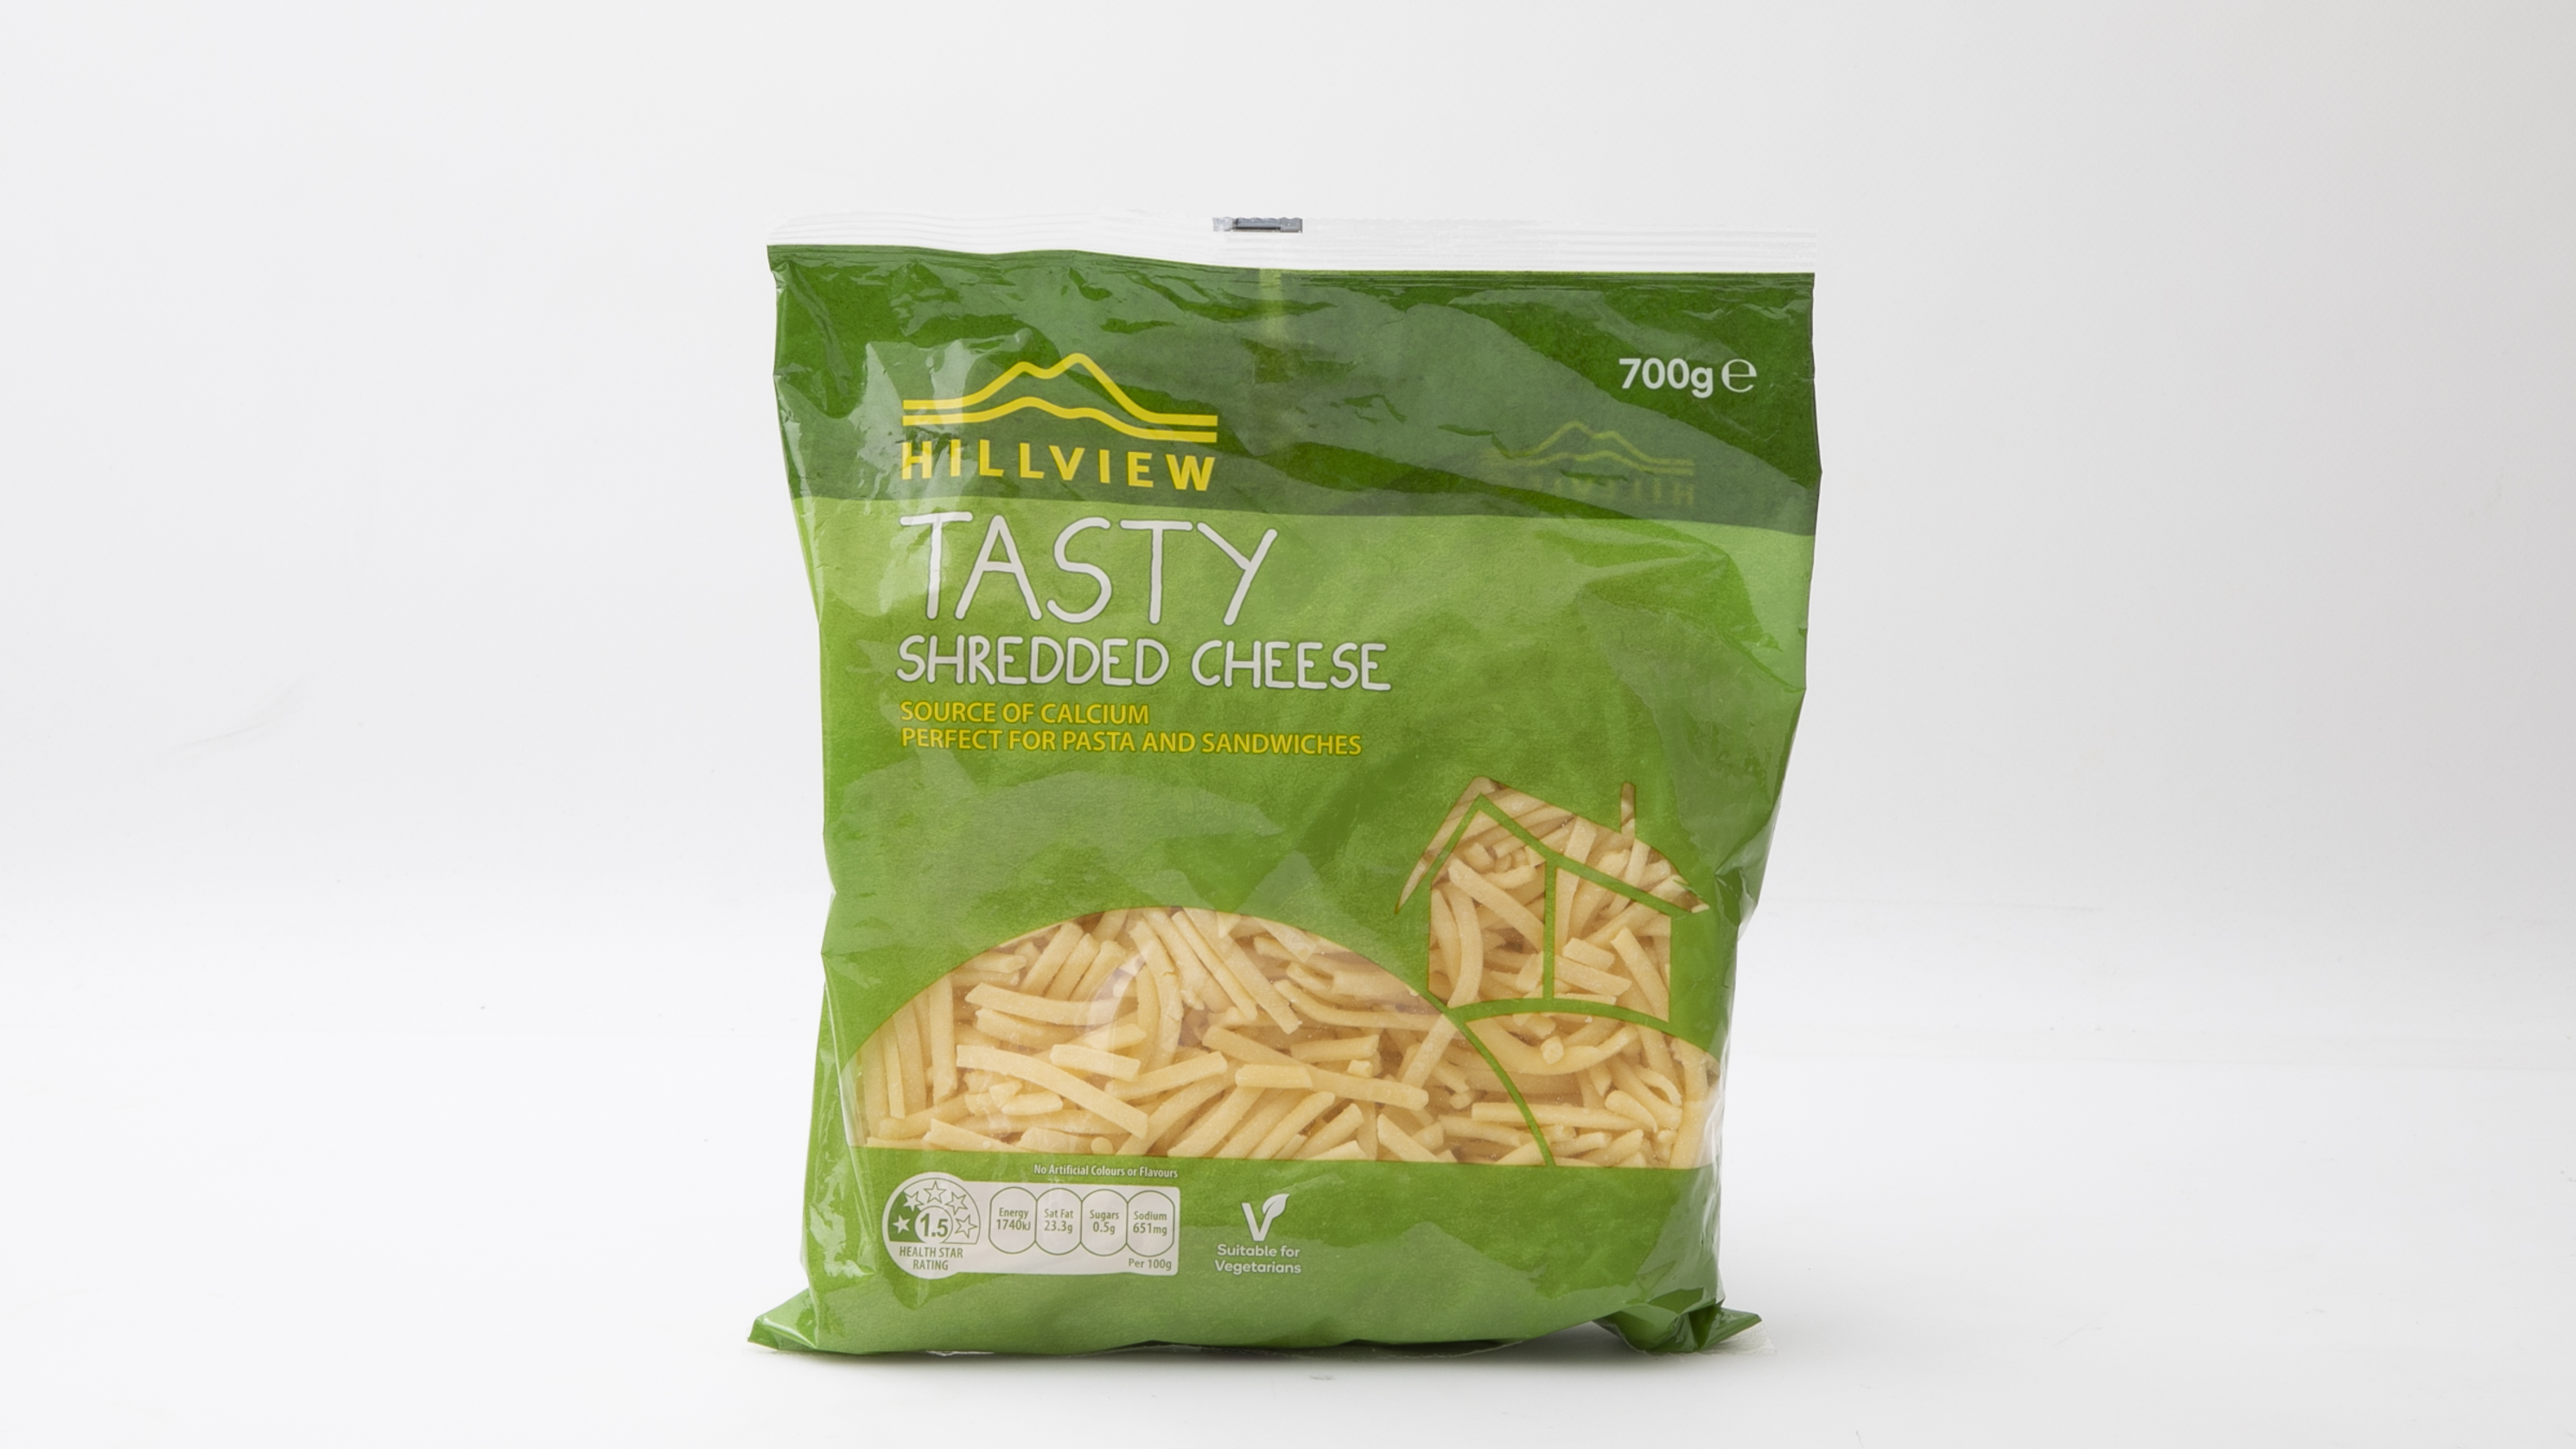 Hillview Tasty Shredded Cheese carousel image